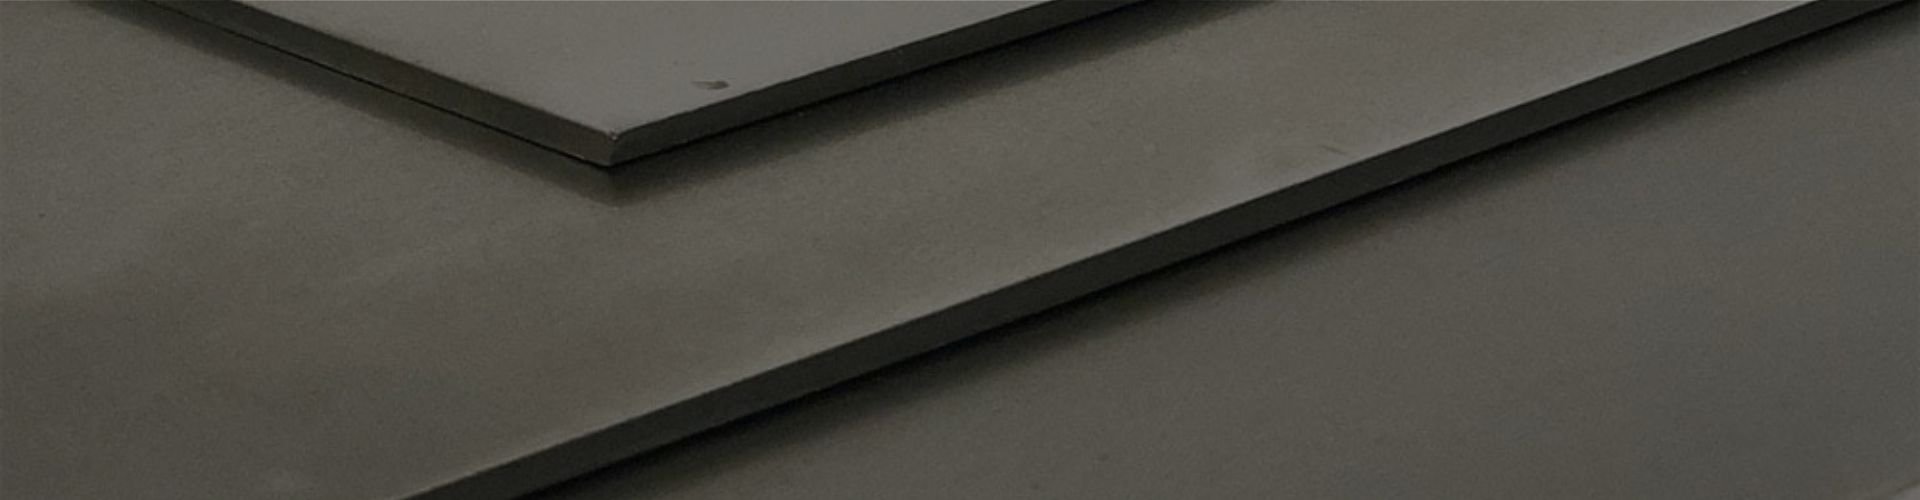 0.9mm Stainless Steel Sheet